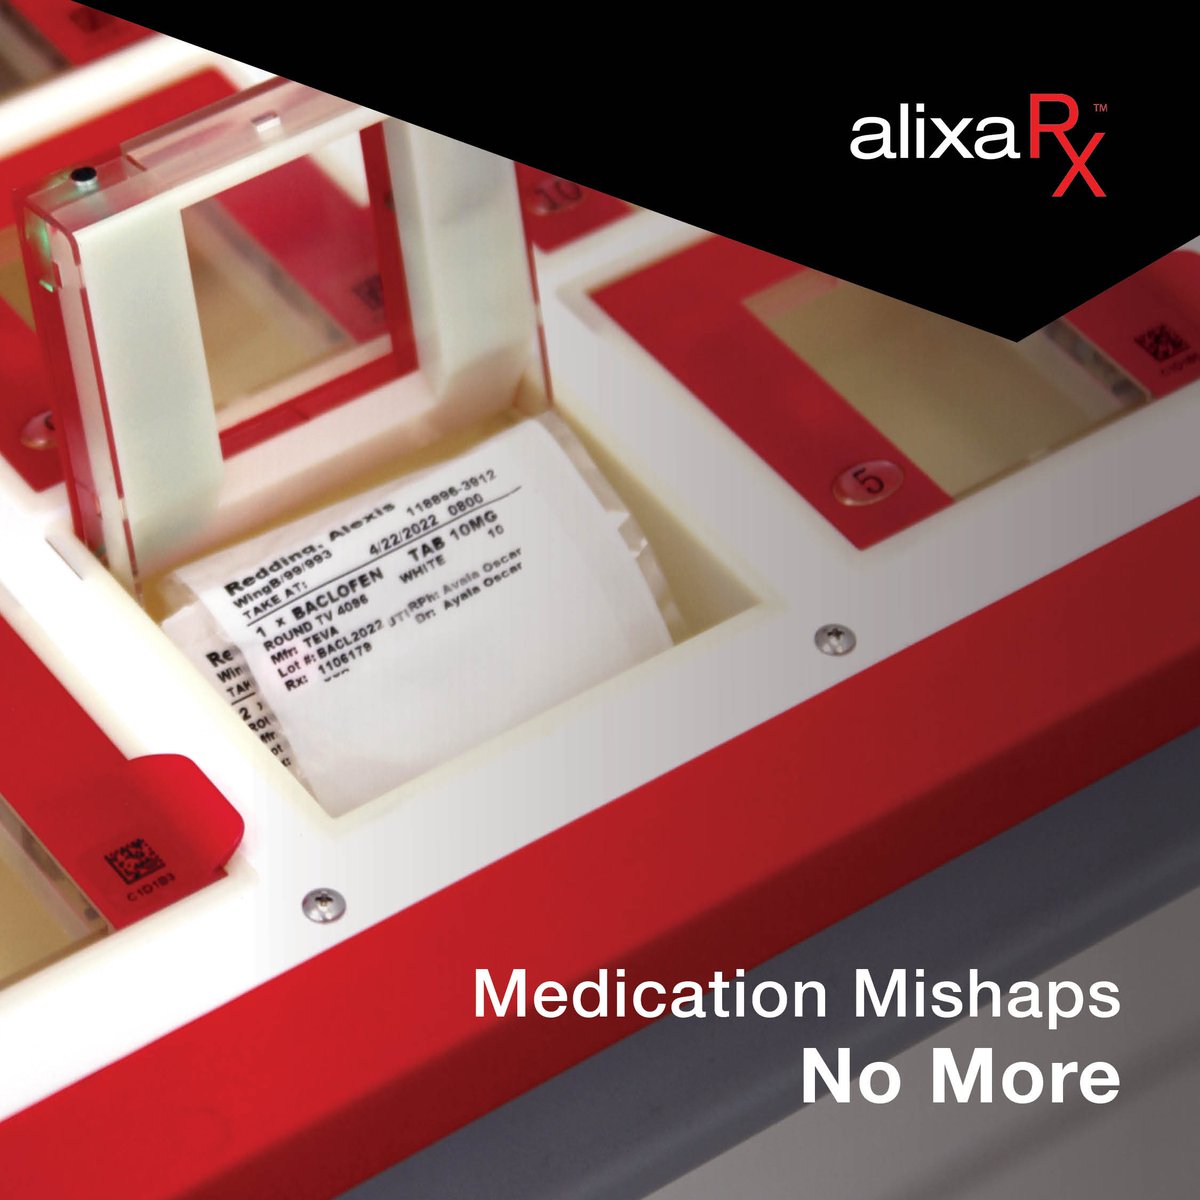 AlixaRx can help reduce medication errors, making healthcare safer for residents.

Contact us today. alixarx.com/contact-us/

#AlixaRx #LTC #PharmacyServices #LongTermCare